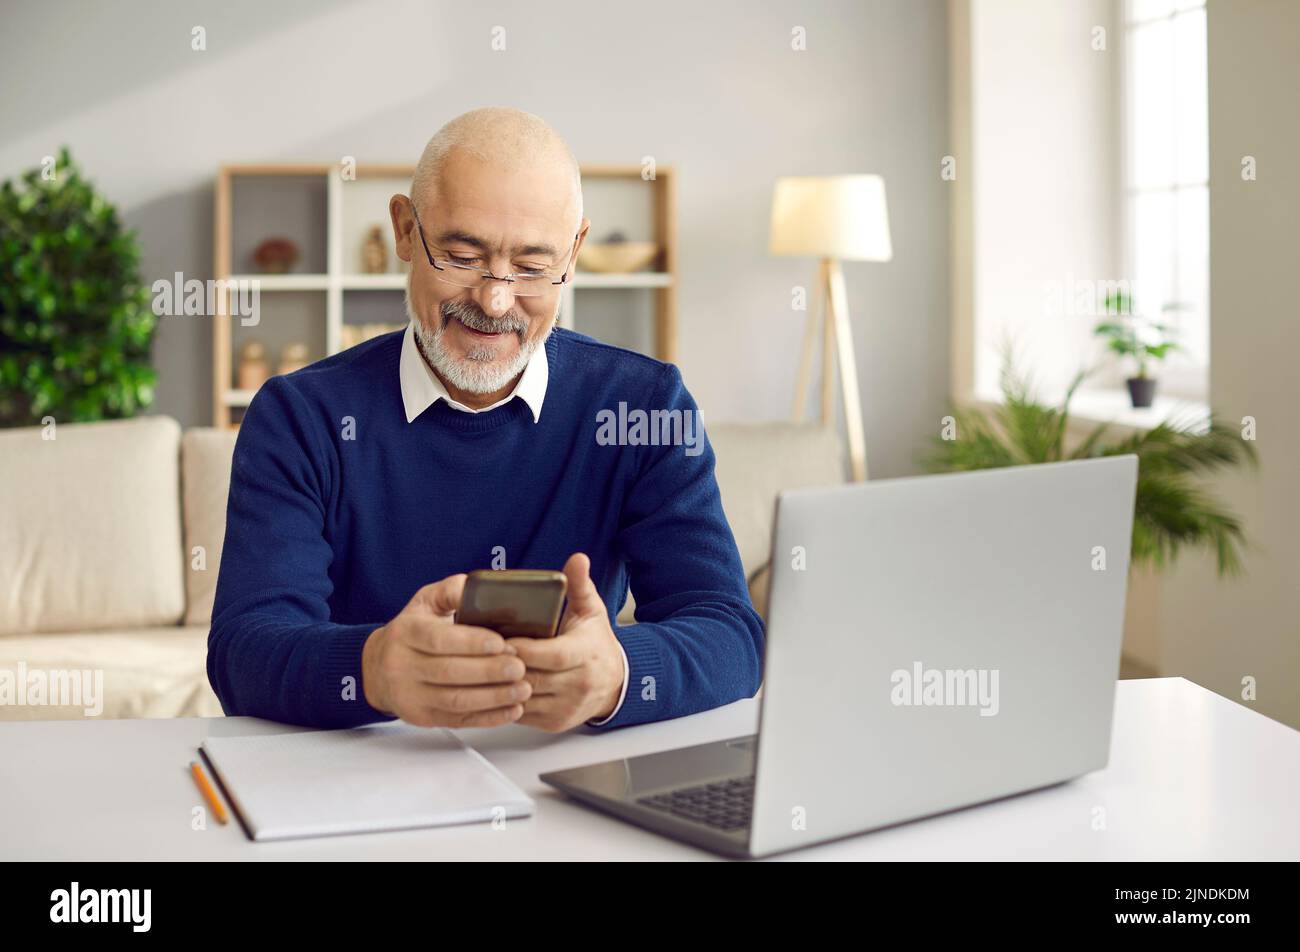 Happy senior man using his mobile phone while sitting at desk with laptop computer Stock Photo